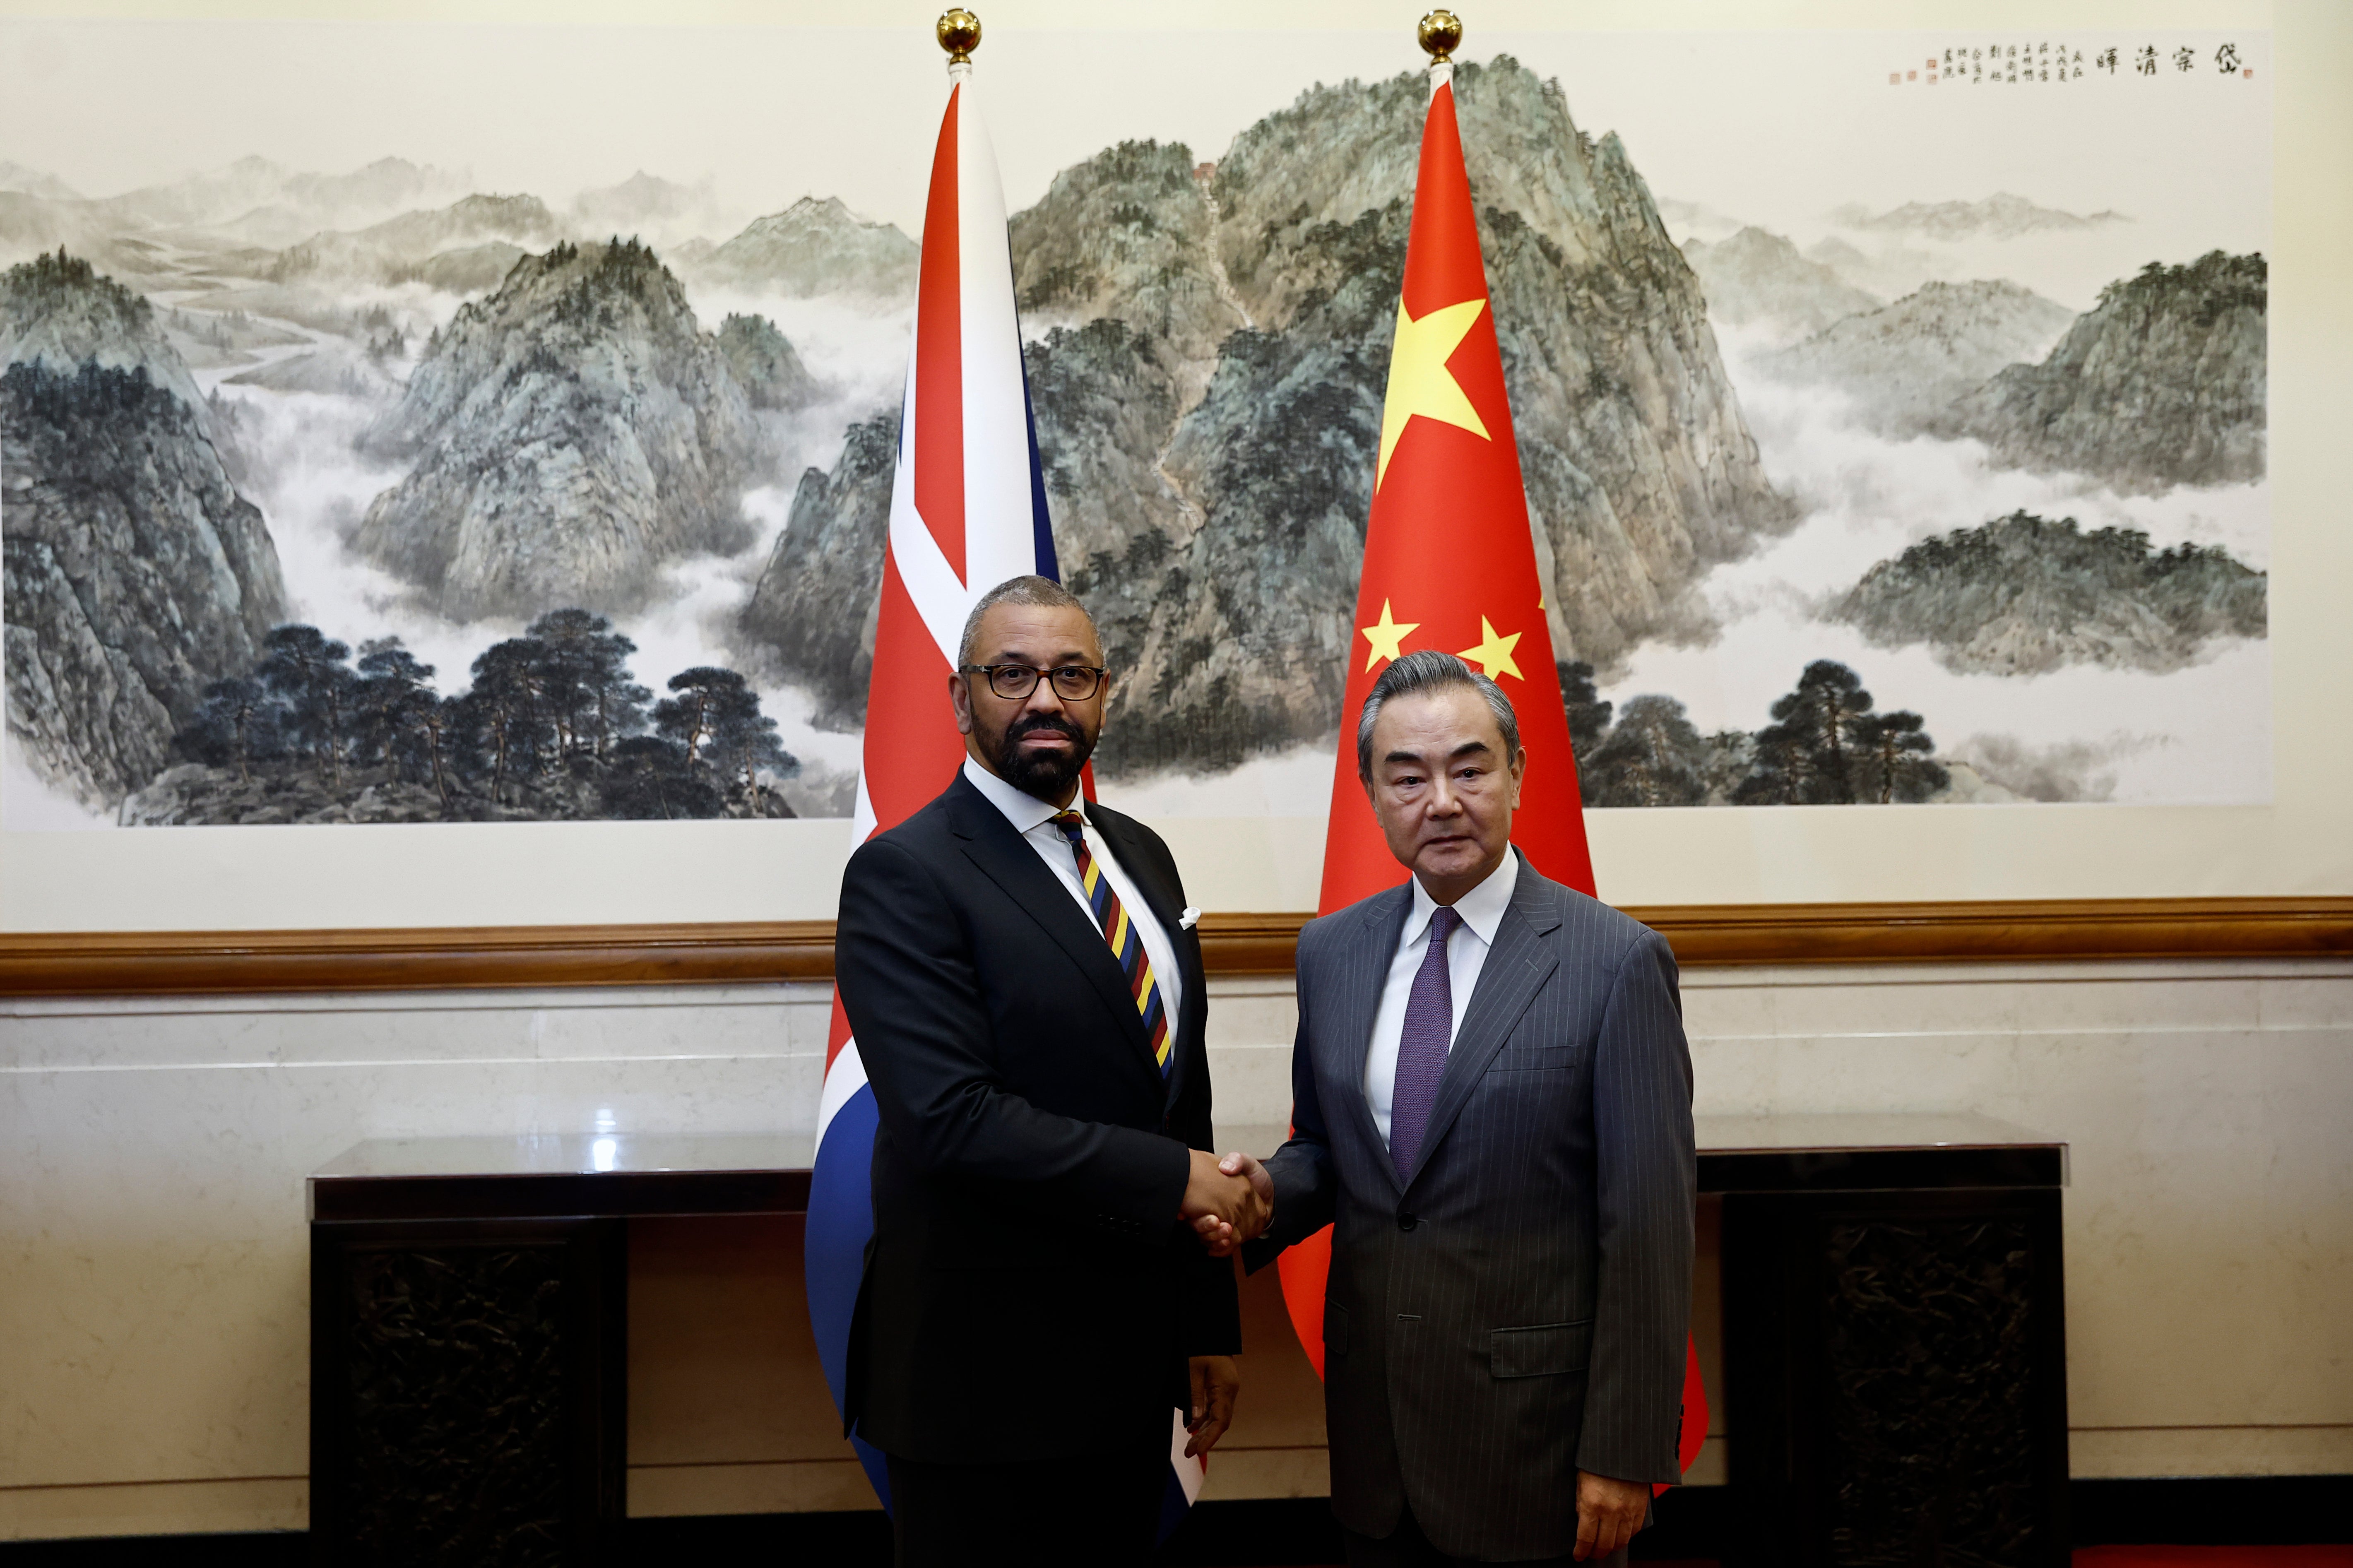 British foreign secretary James Cleverly with Chinese foreign minister Wang Yi in August this year